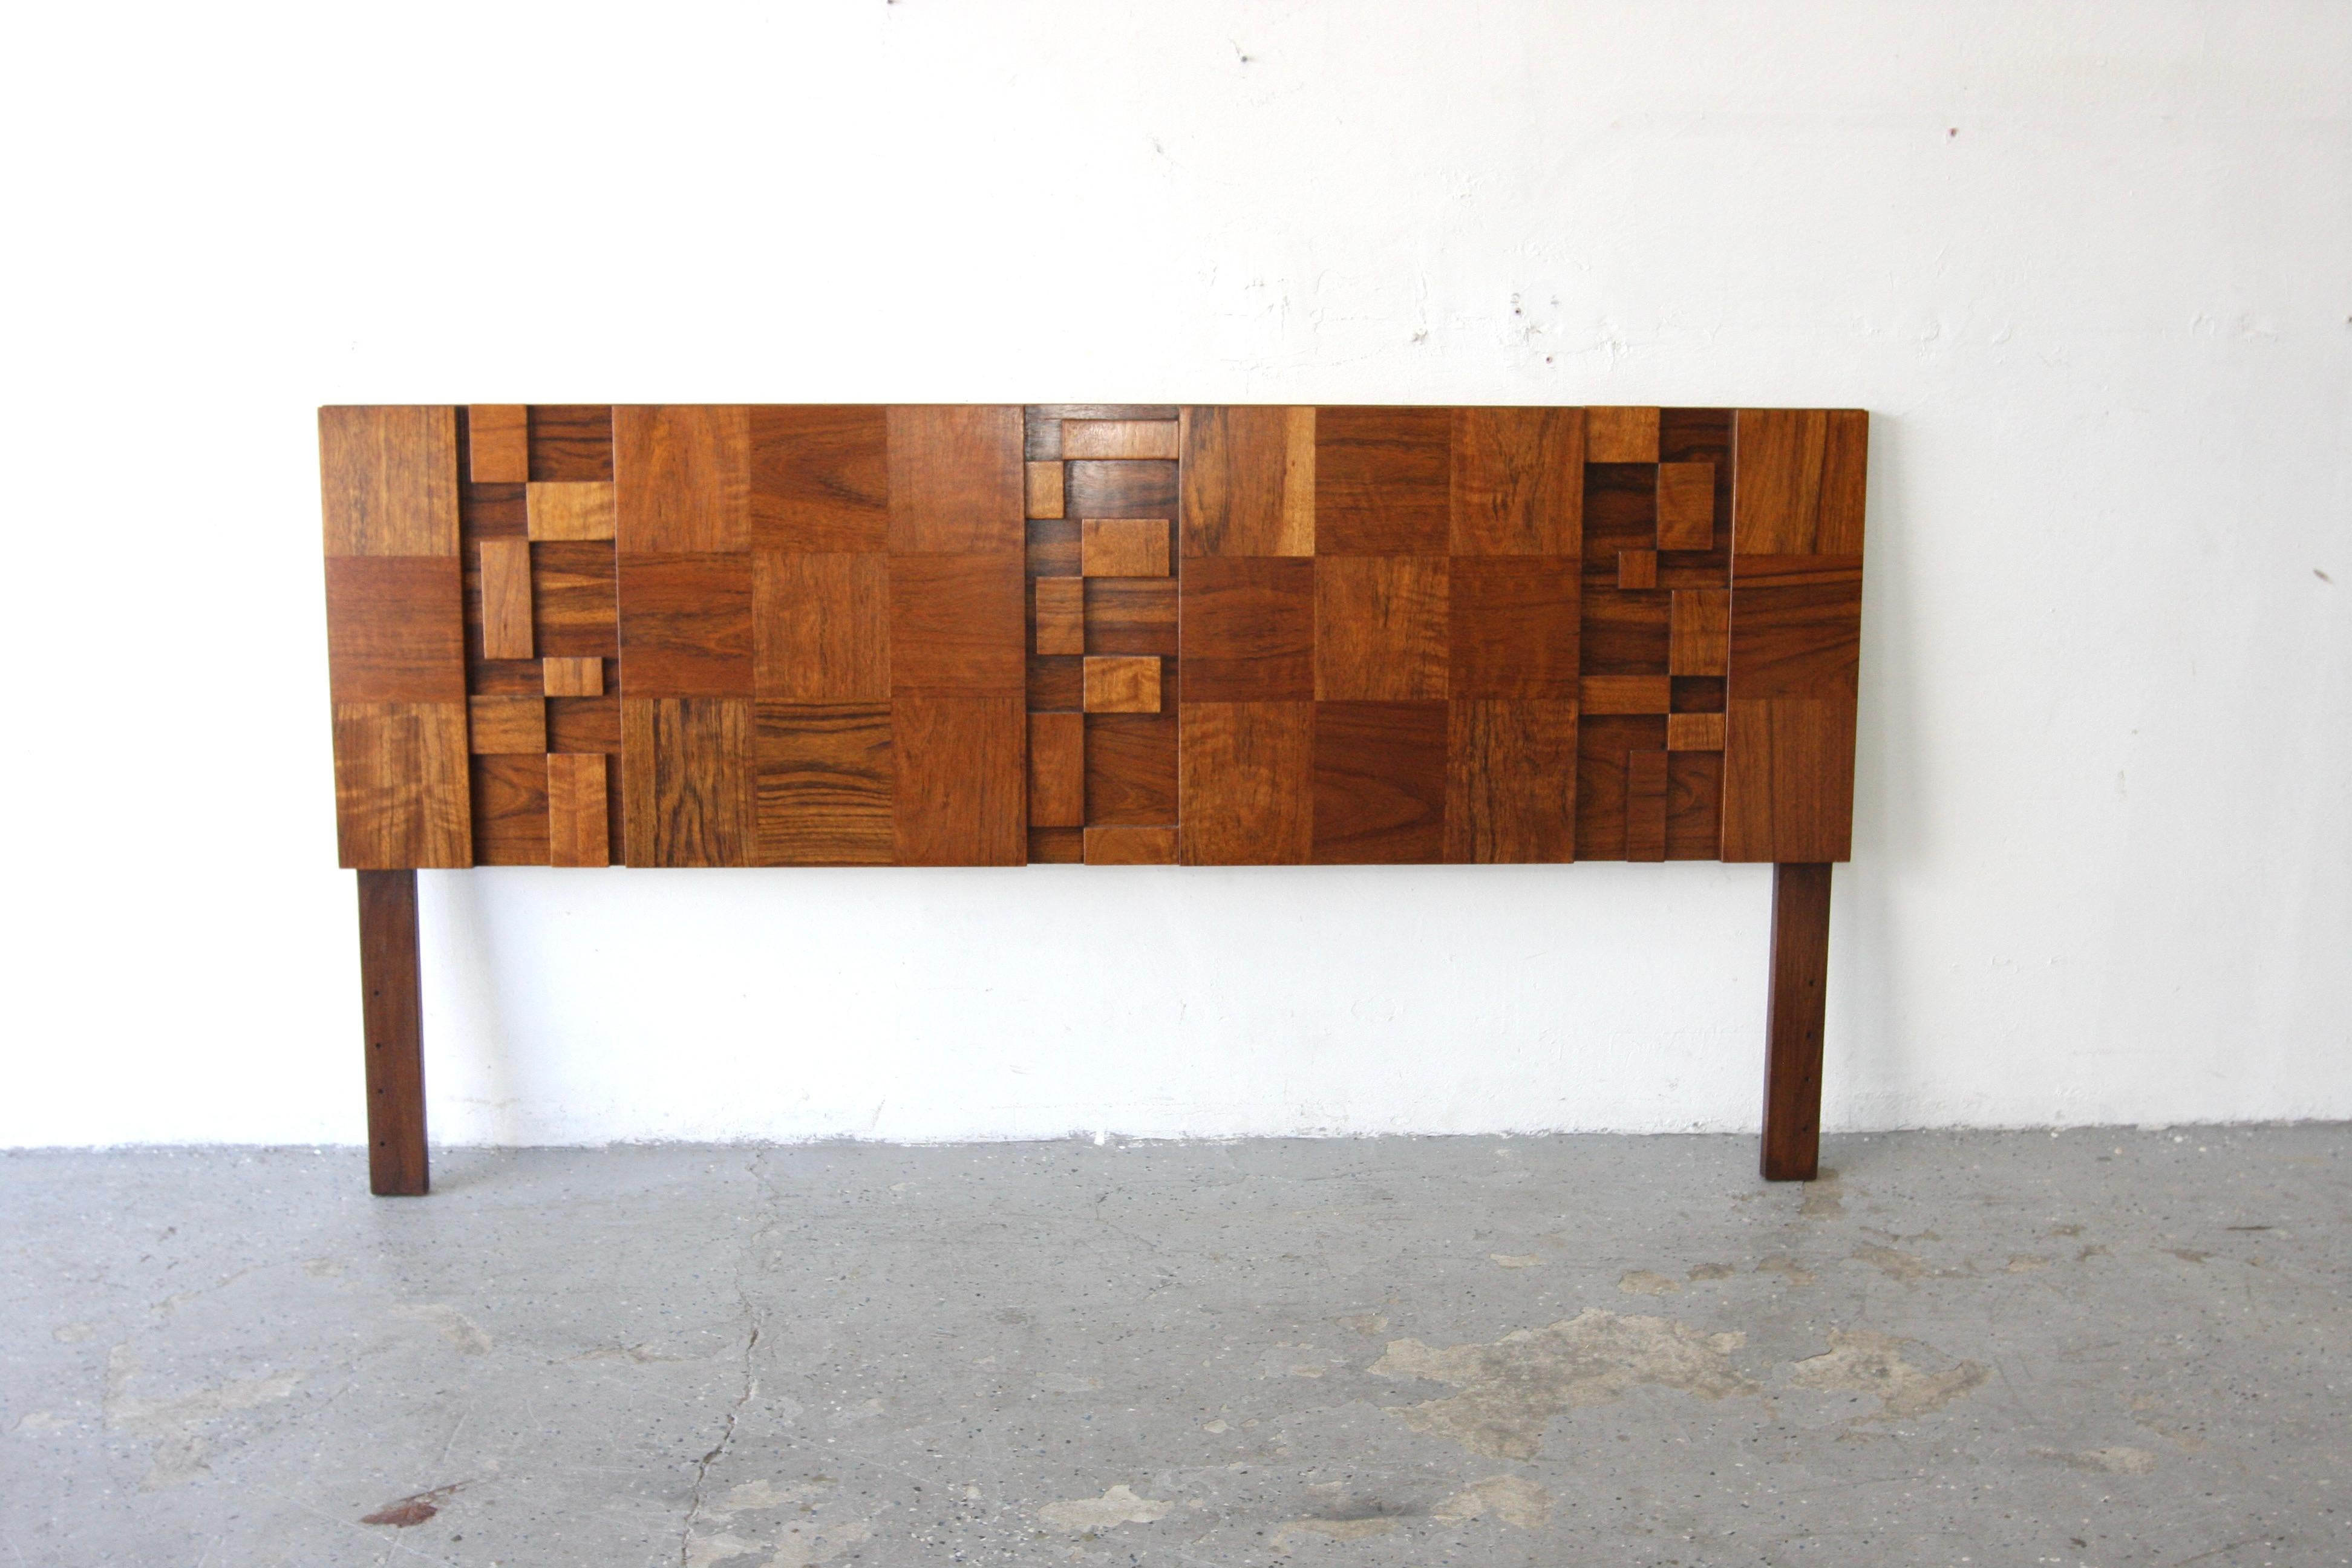 Paul Evans style lane Brutalist Mid Century Walnut King Headboard (two available)

Paul Evans style lane Brutalist mid century walnut queen headboard.  Very nice Lane brutalist headboard headboard. Headboard has been  refinished and brought back to